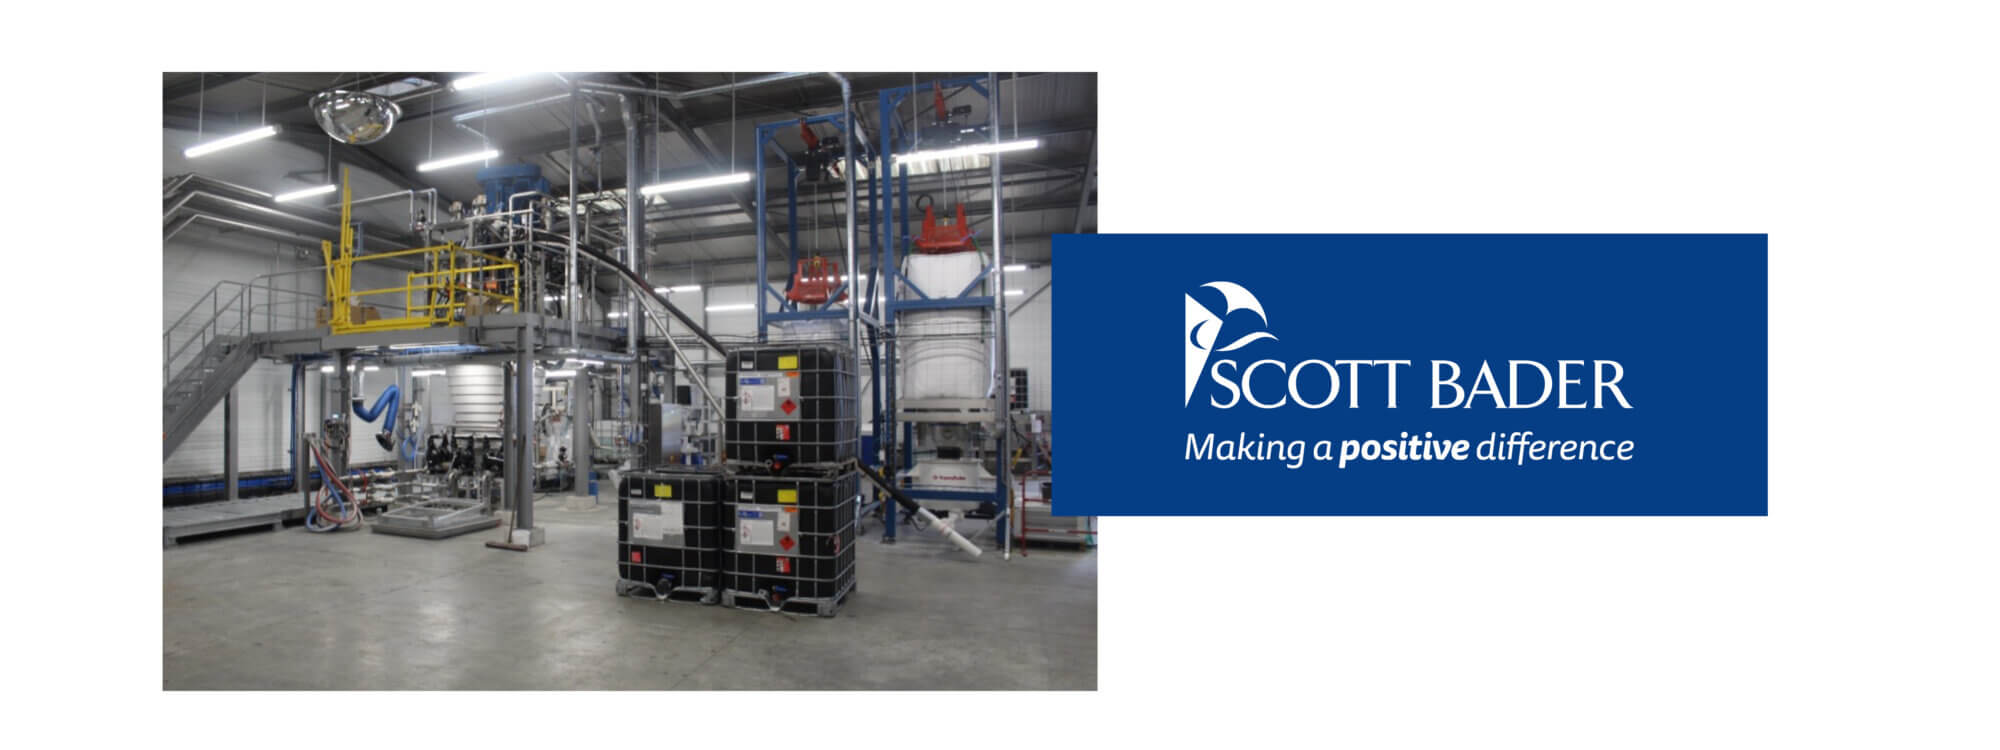 Scott Bader further expands its production capacity for adhesives, bonding pastes, gelcoats and formulated products